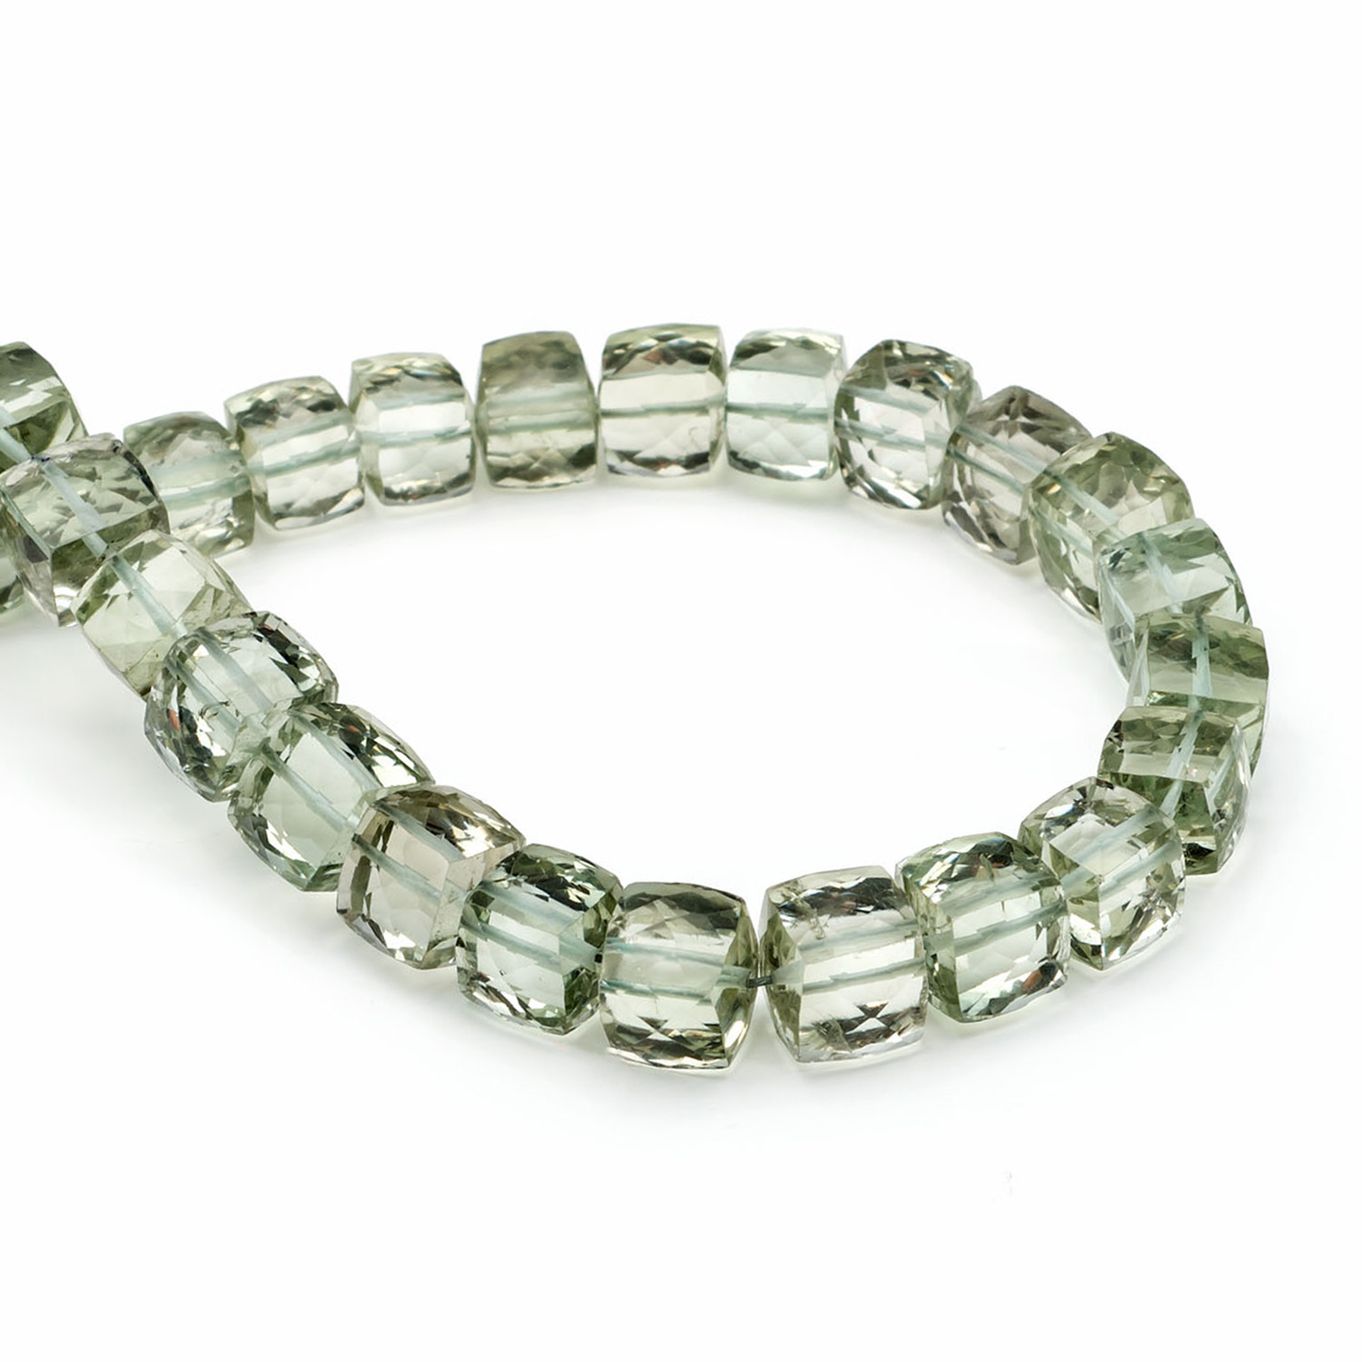 Green Amethyst Faceted Puffed Cube Beads - Approx From 5mm